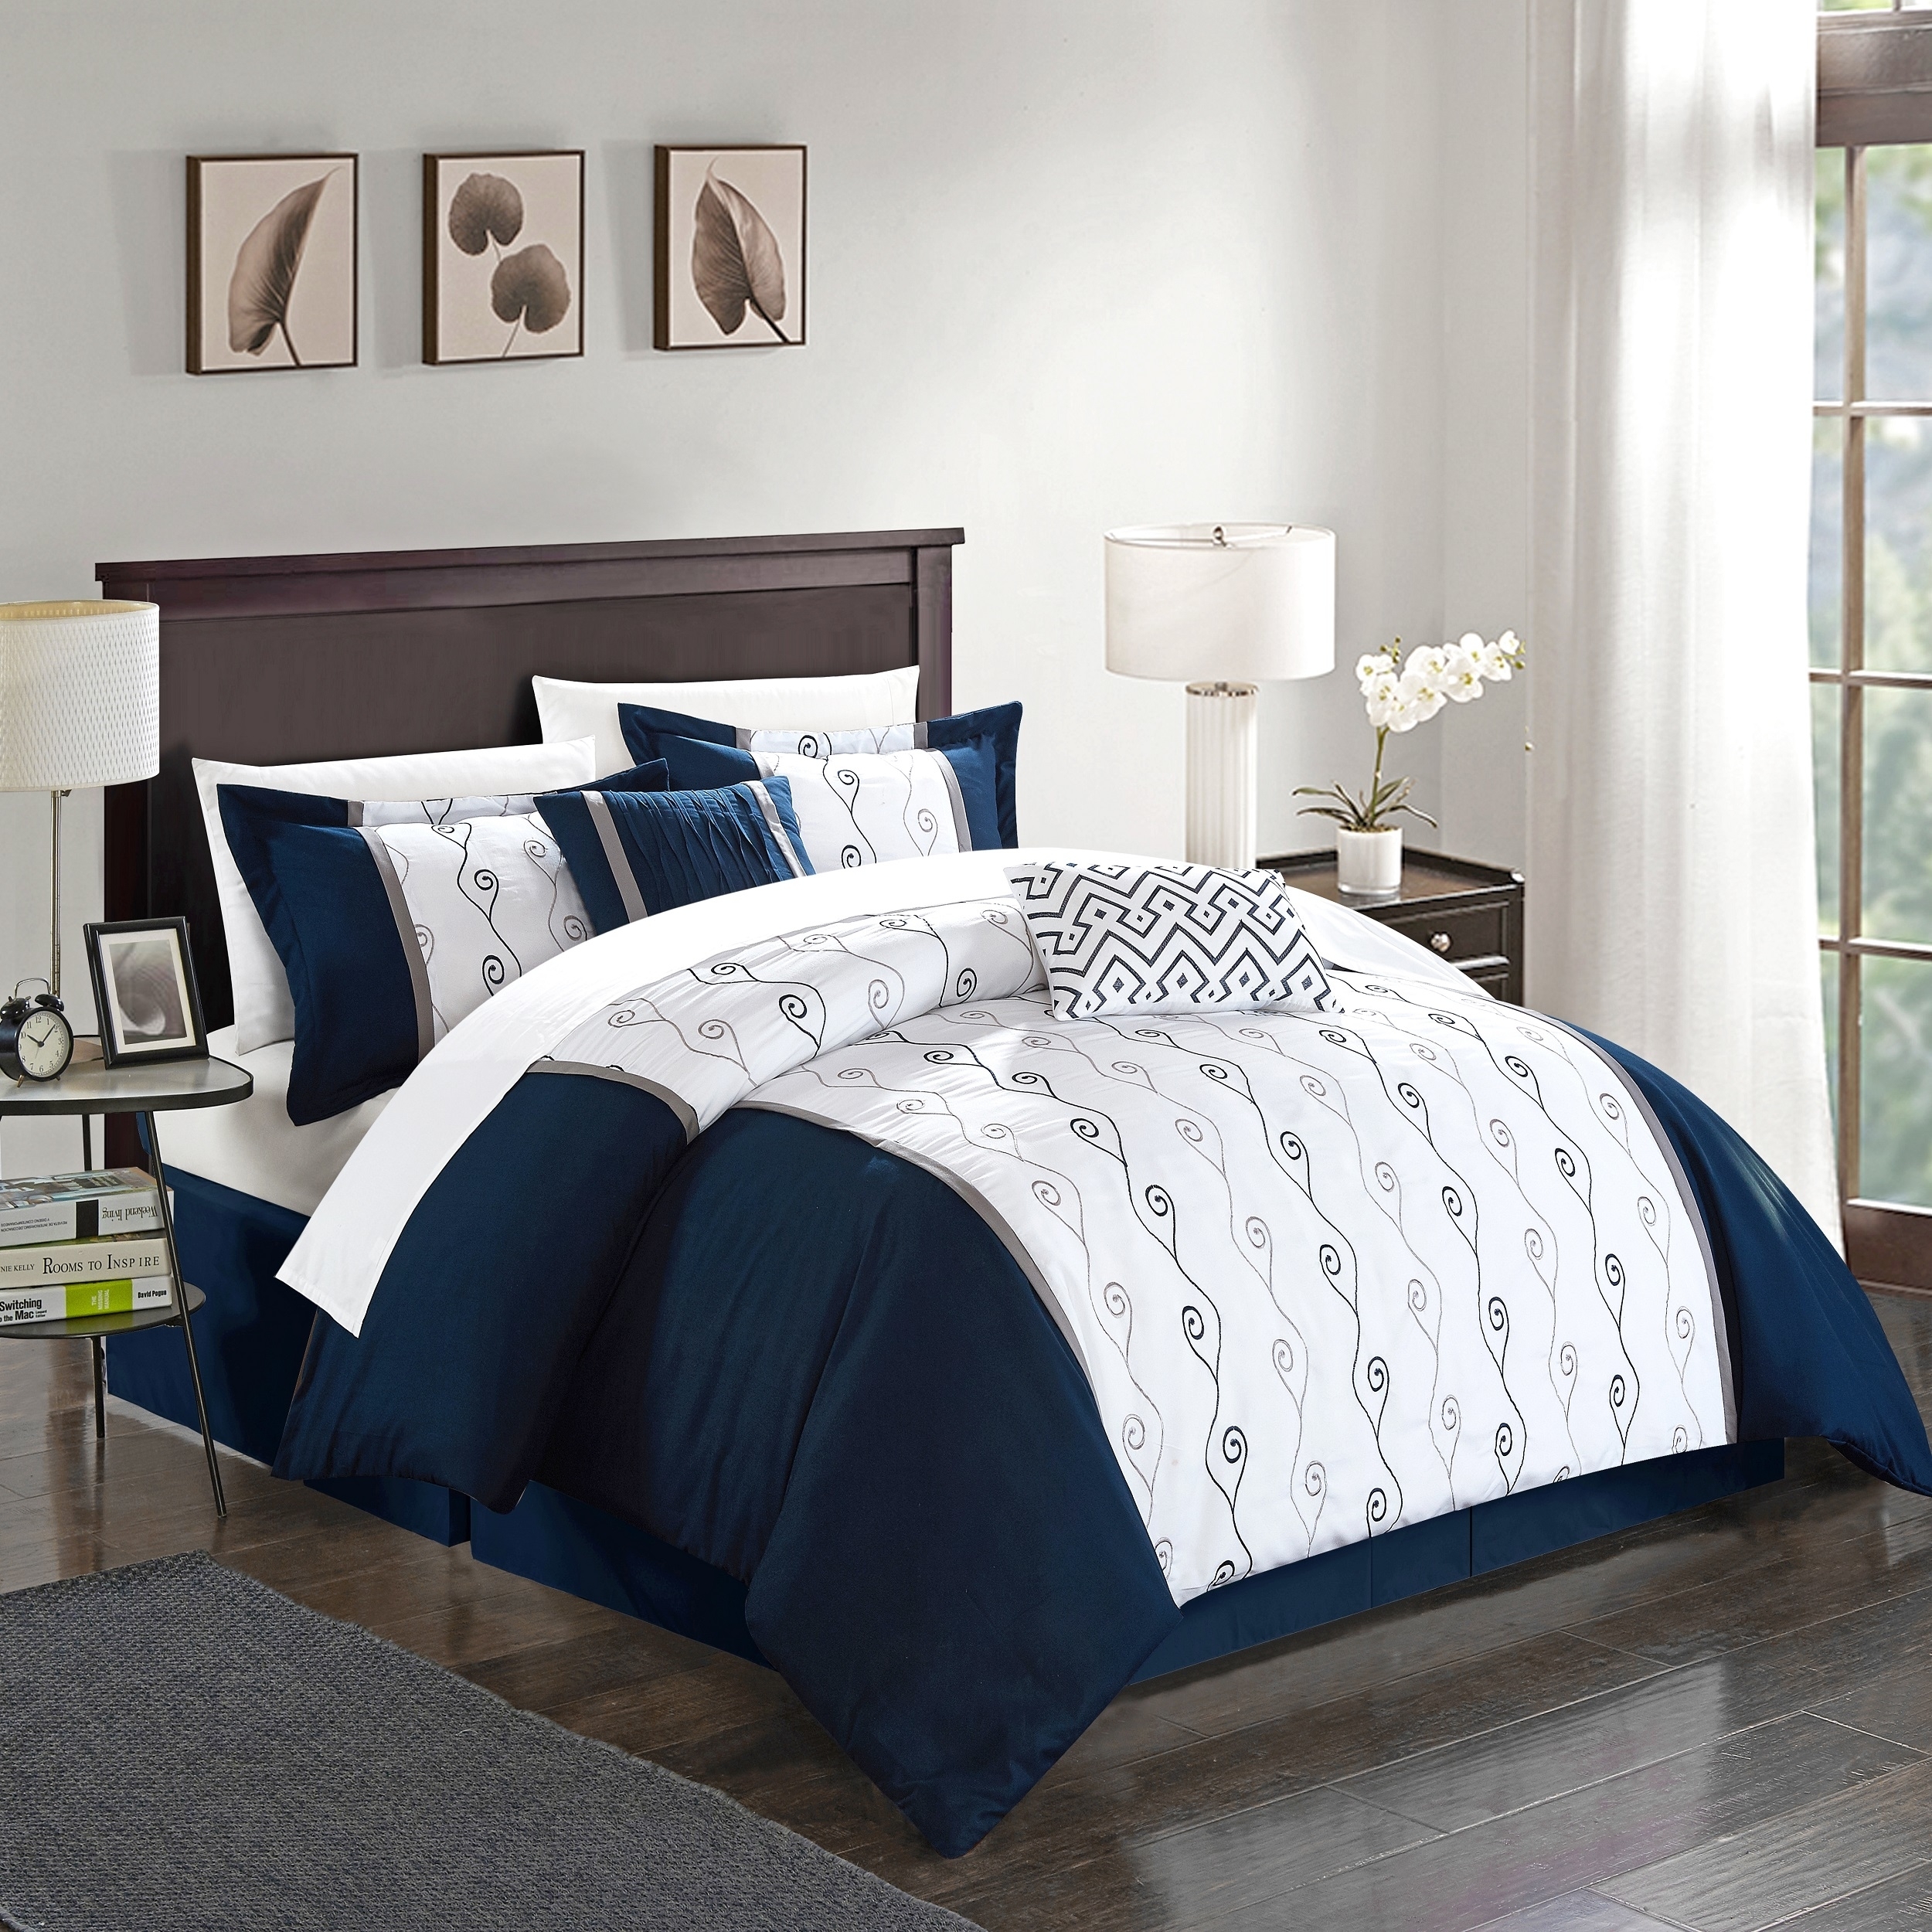 Lystra 6 Piece Comforter Set Color Block Embroidered Bed In A Bag Bedding - Navy, King